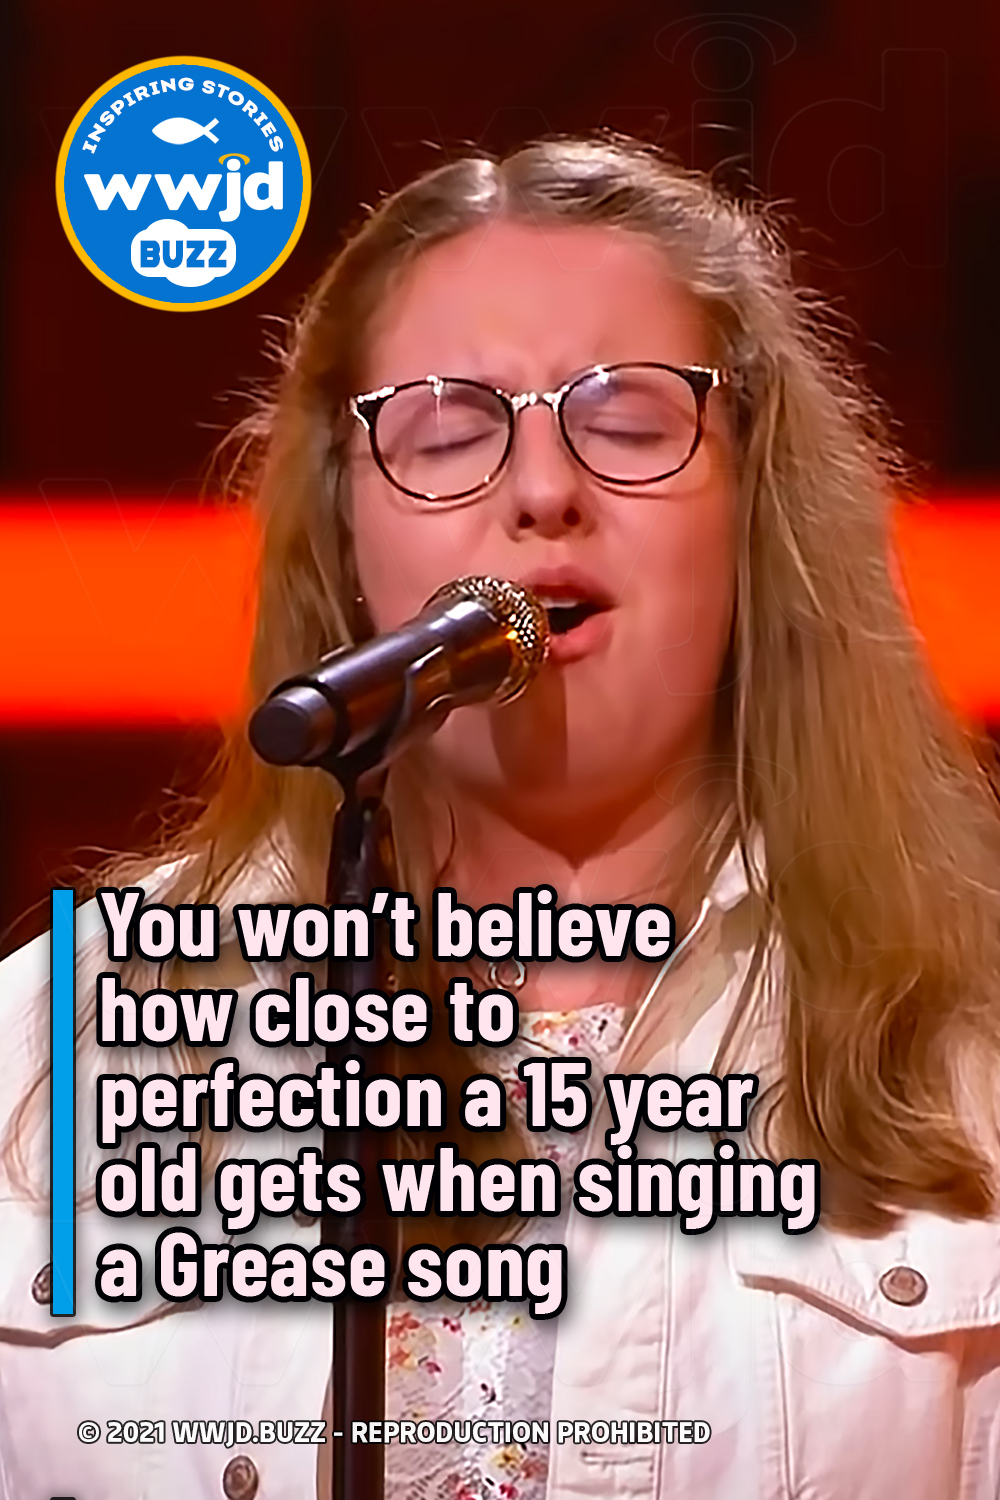 You won’t believe how close to perfection a 15 year old gets when singing a Grease song